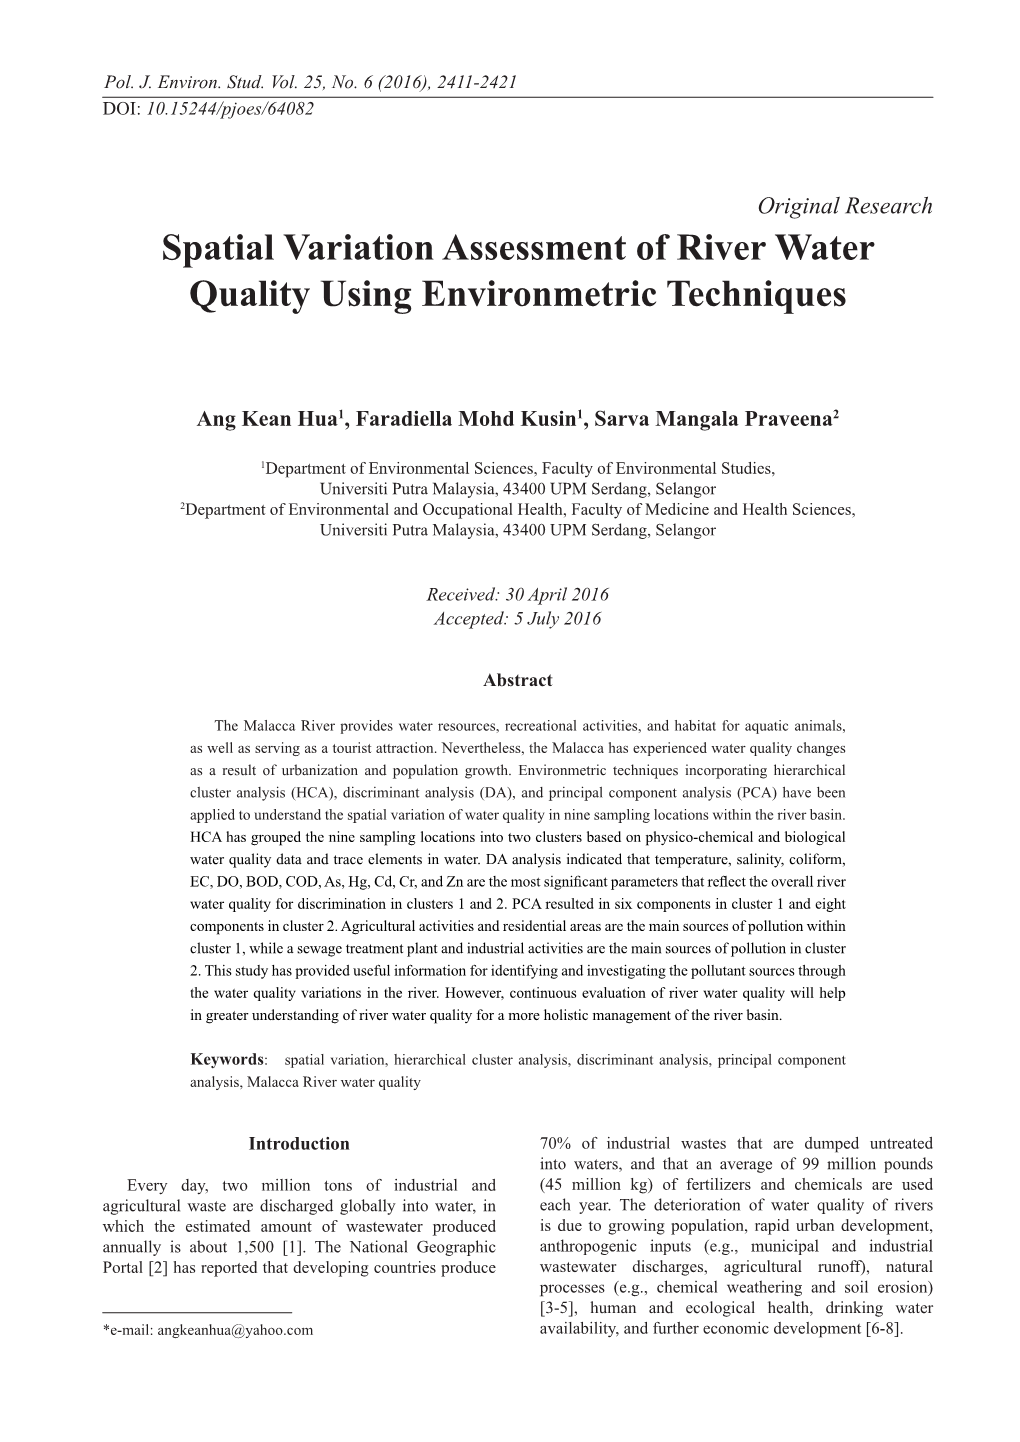 Spatial Variation Assessment of River Water Quality Using Environmetric Techniques